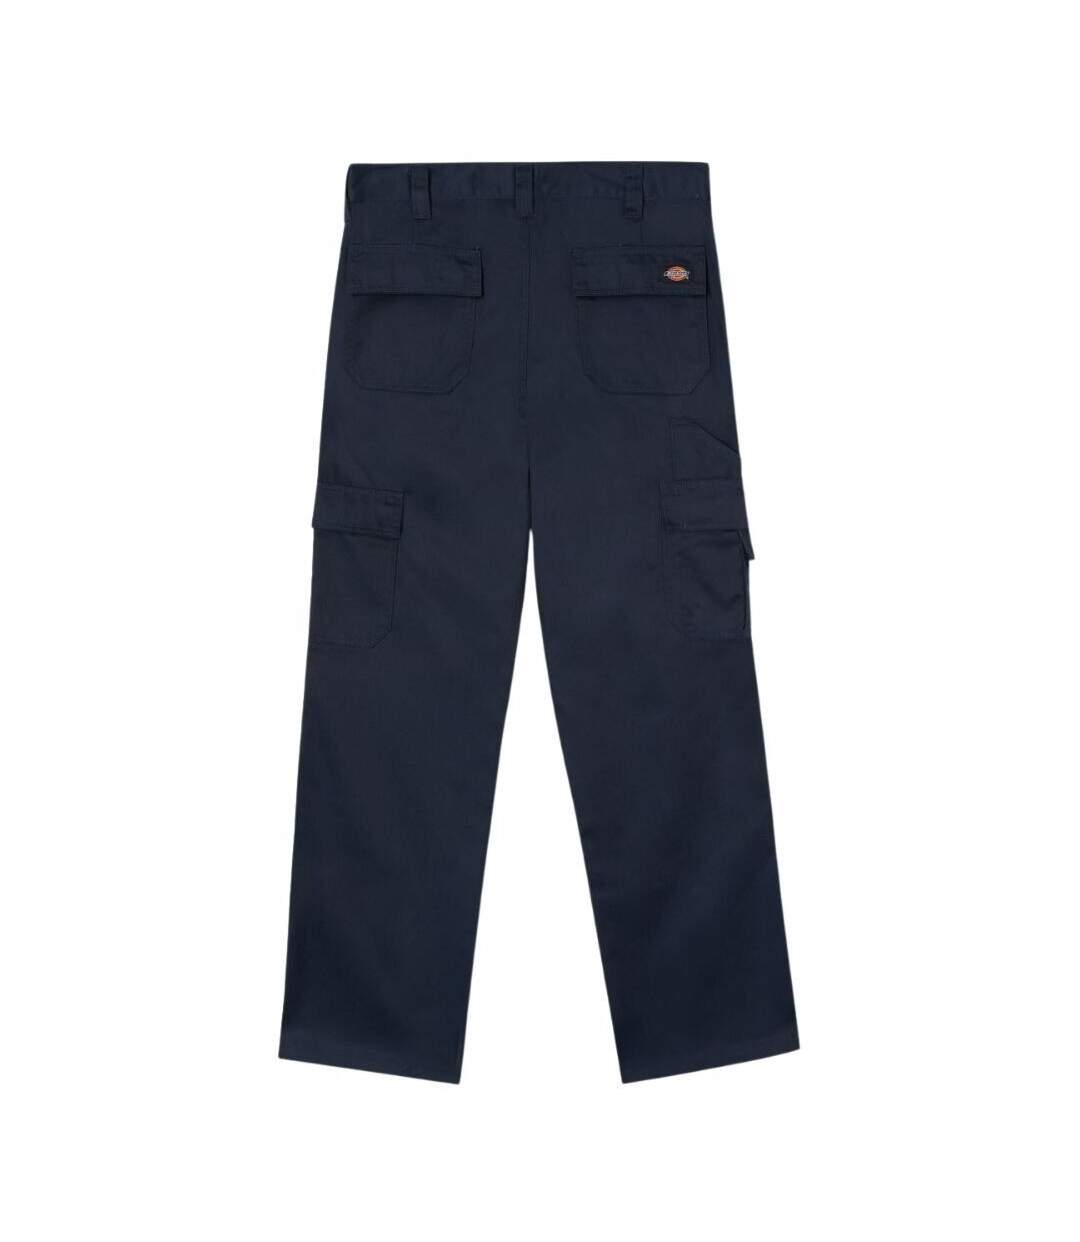 Pantalon  multipoches Dickies EVERYDAY bicolore